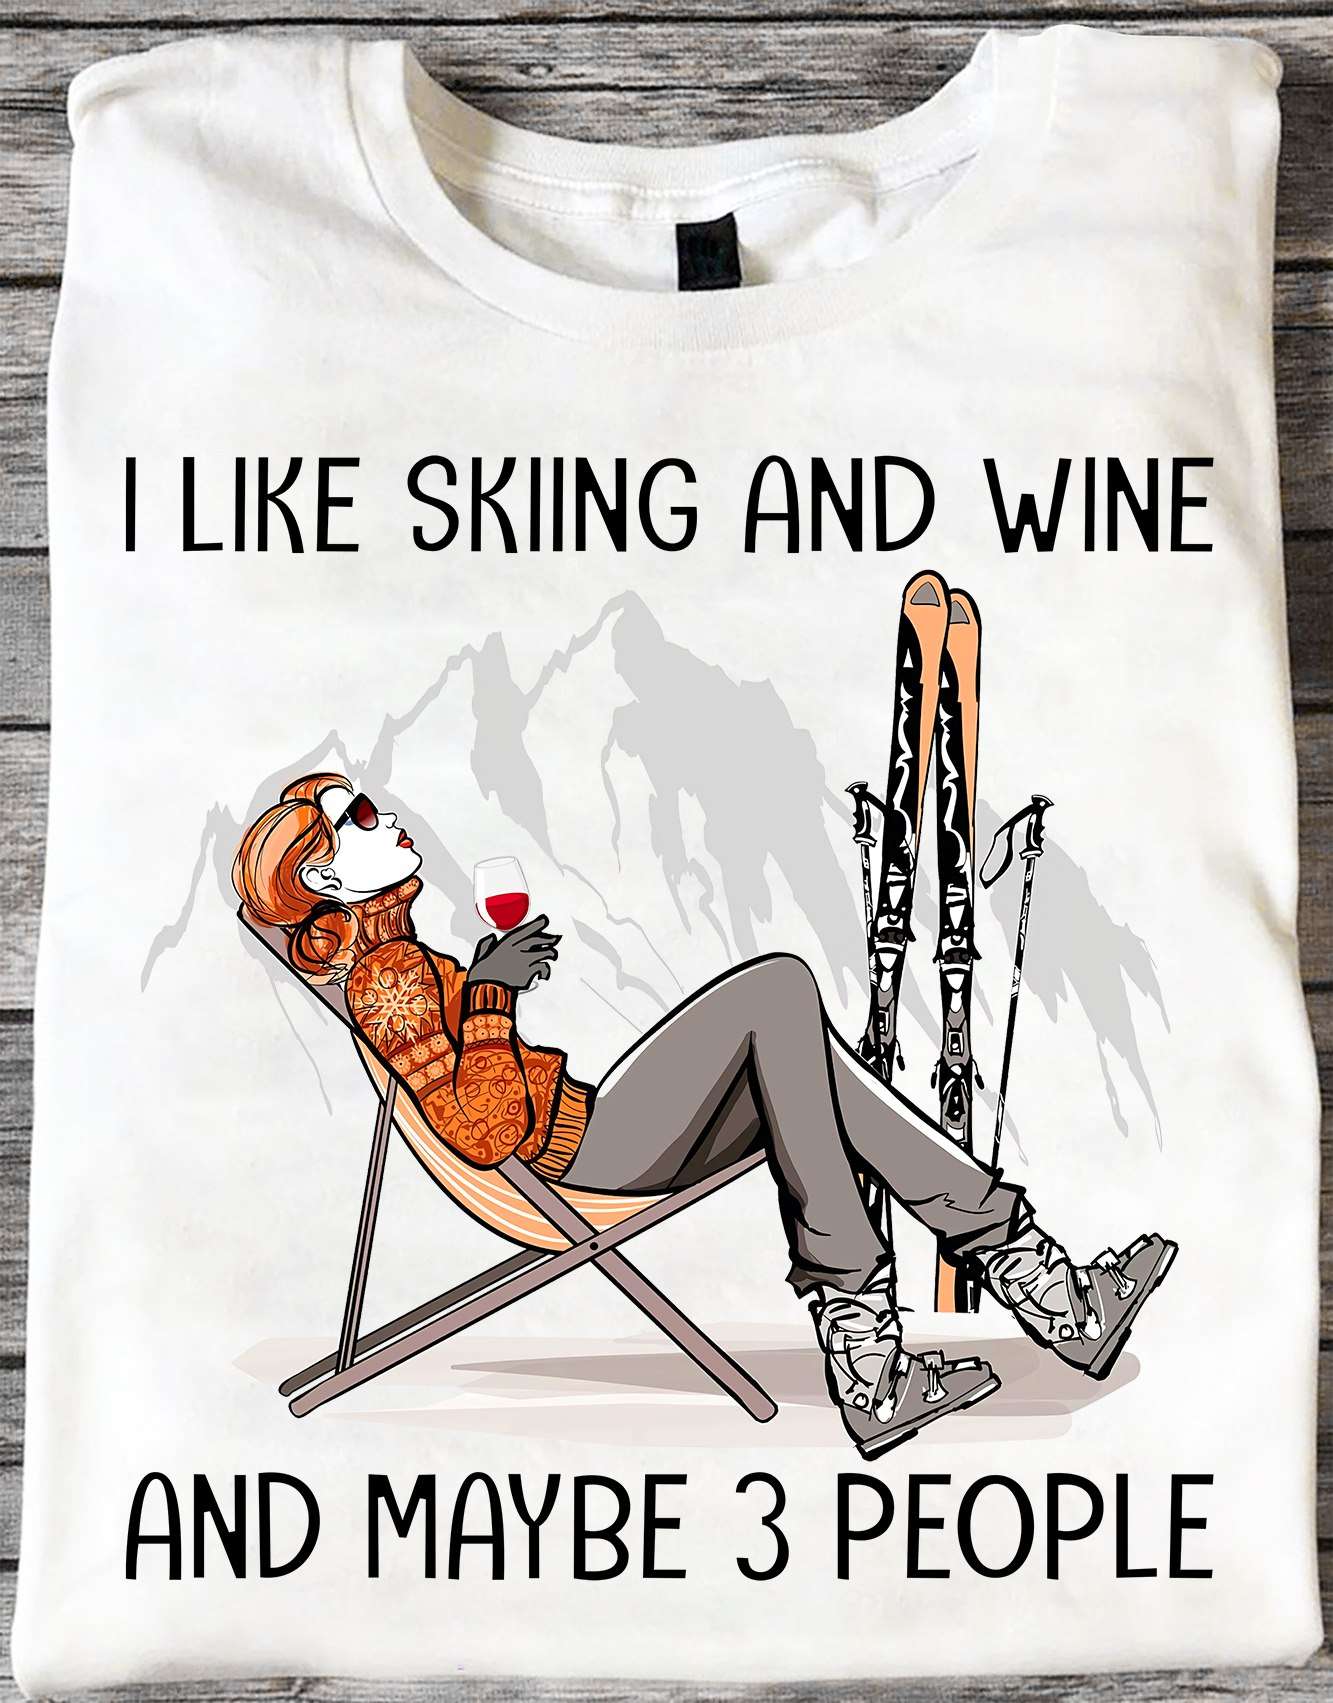 I like skiing and wine and maybe 3 people - Woman the skiier, gift for skiing people